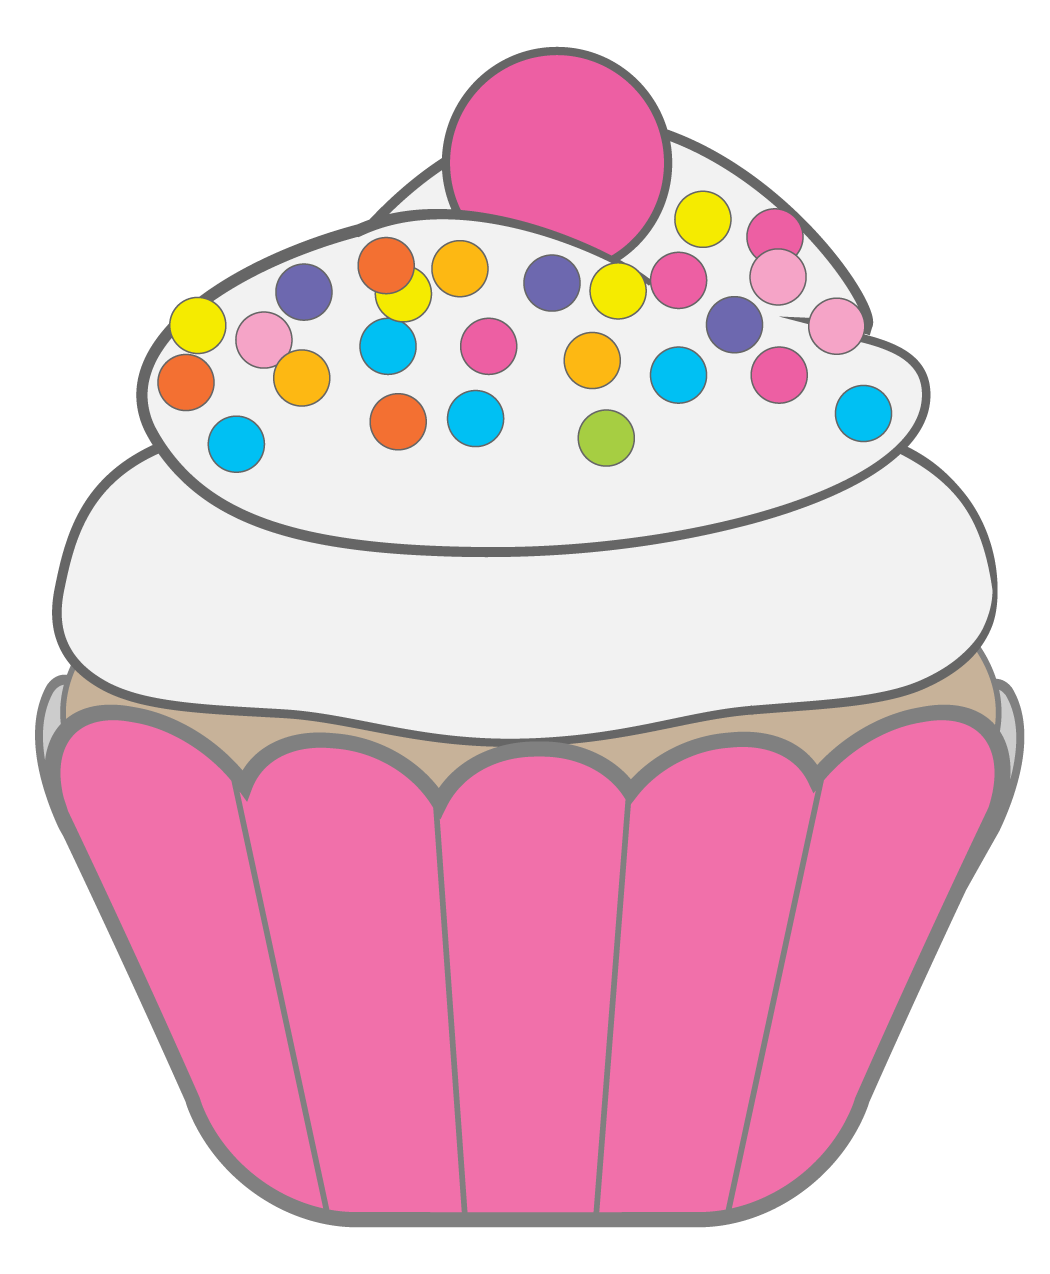 Free Cake Clip Art Pictures - - Free Cake Clipart